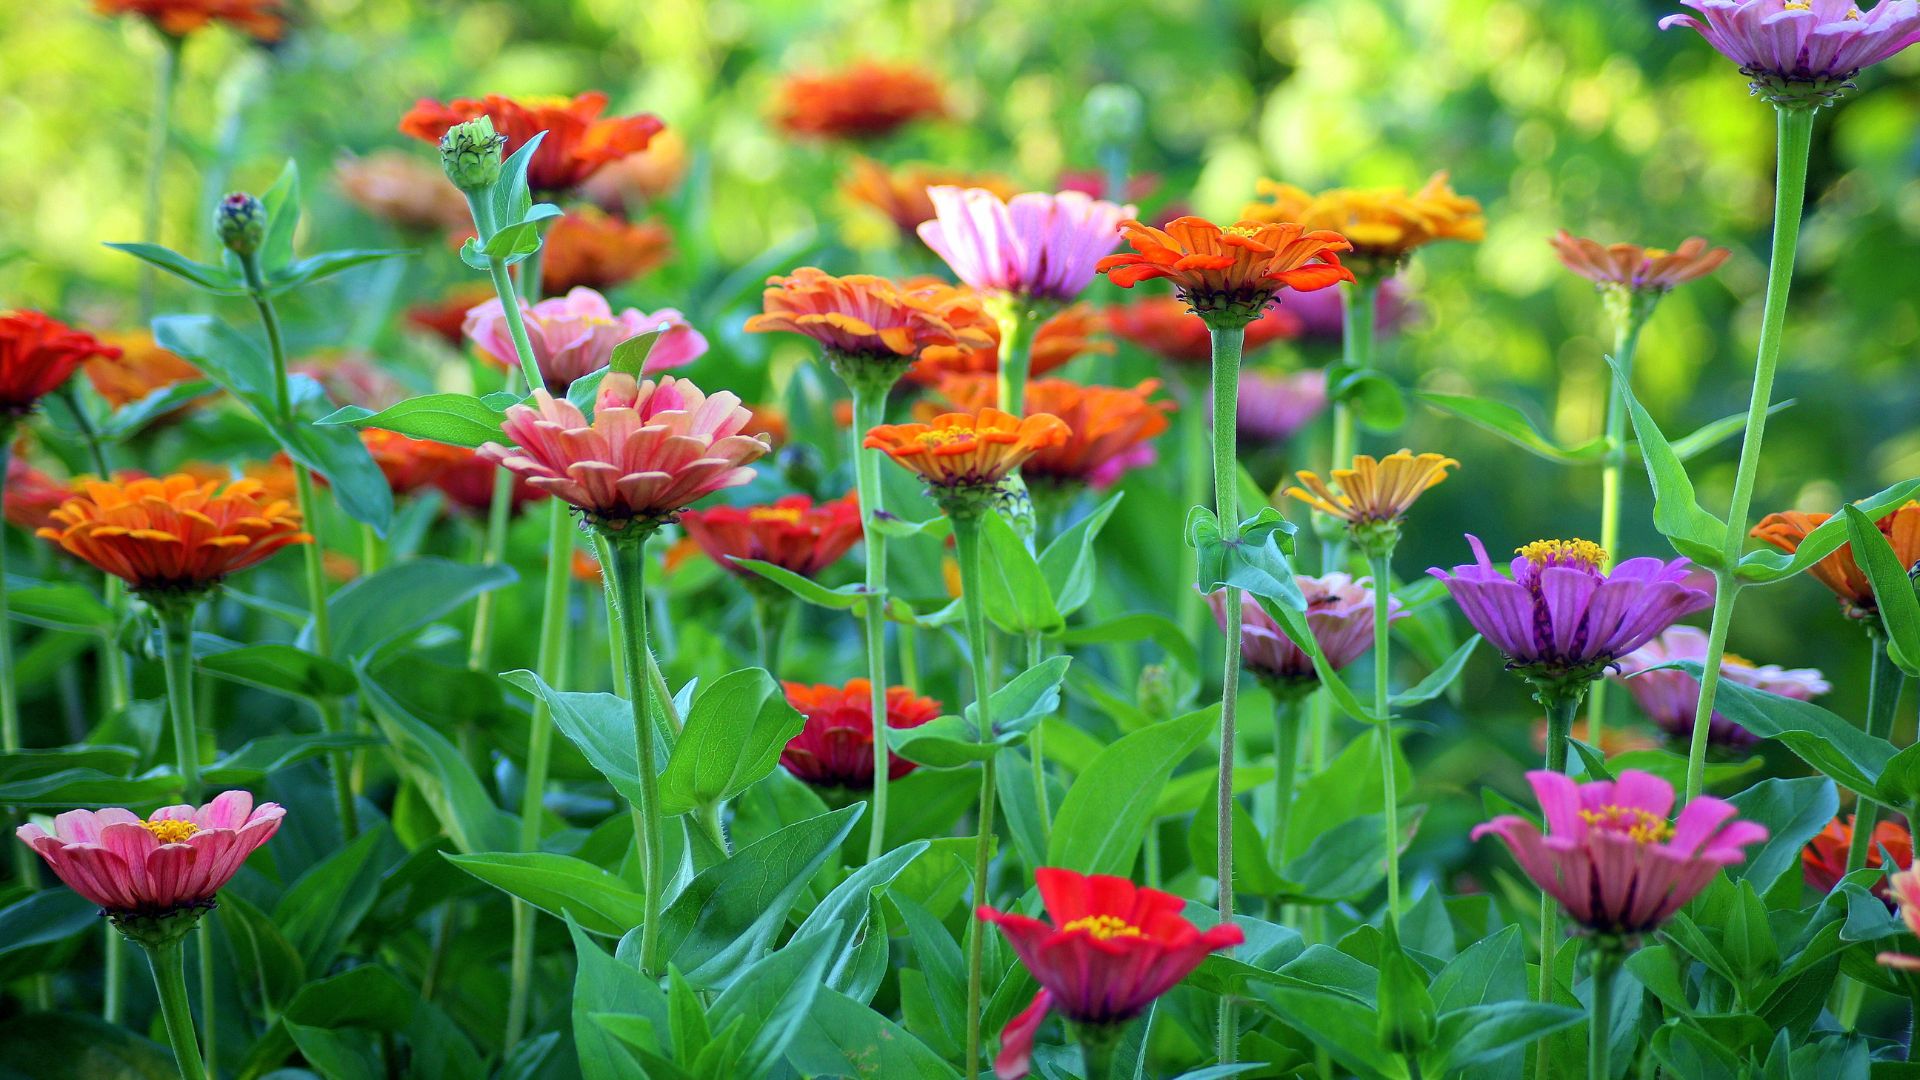 Bright, colorful flowers in purple, pink, and orange